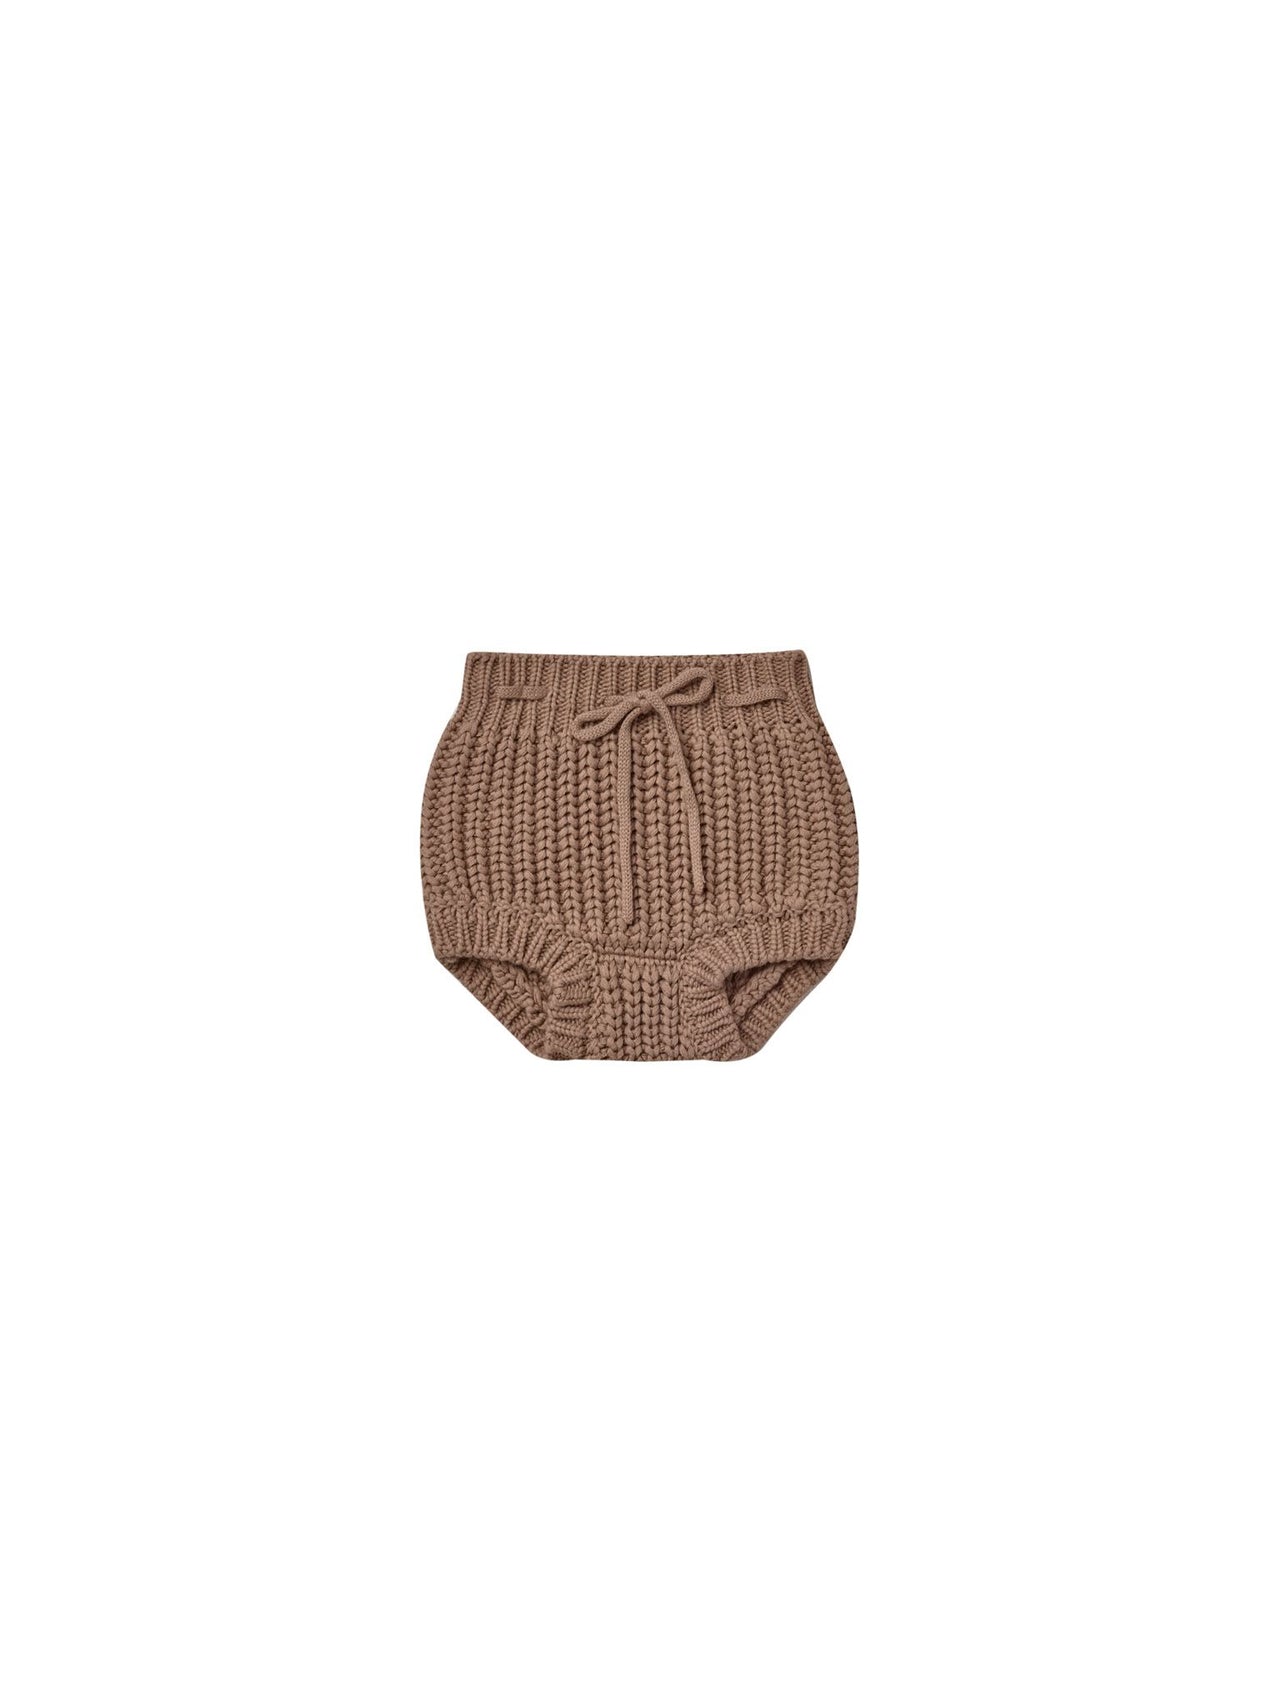 Quincy Mae Knit Bloomer, Cocoa